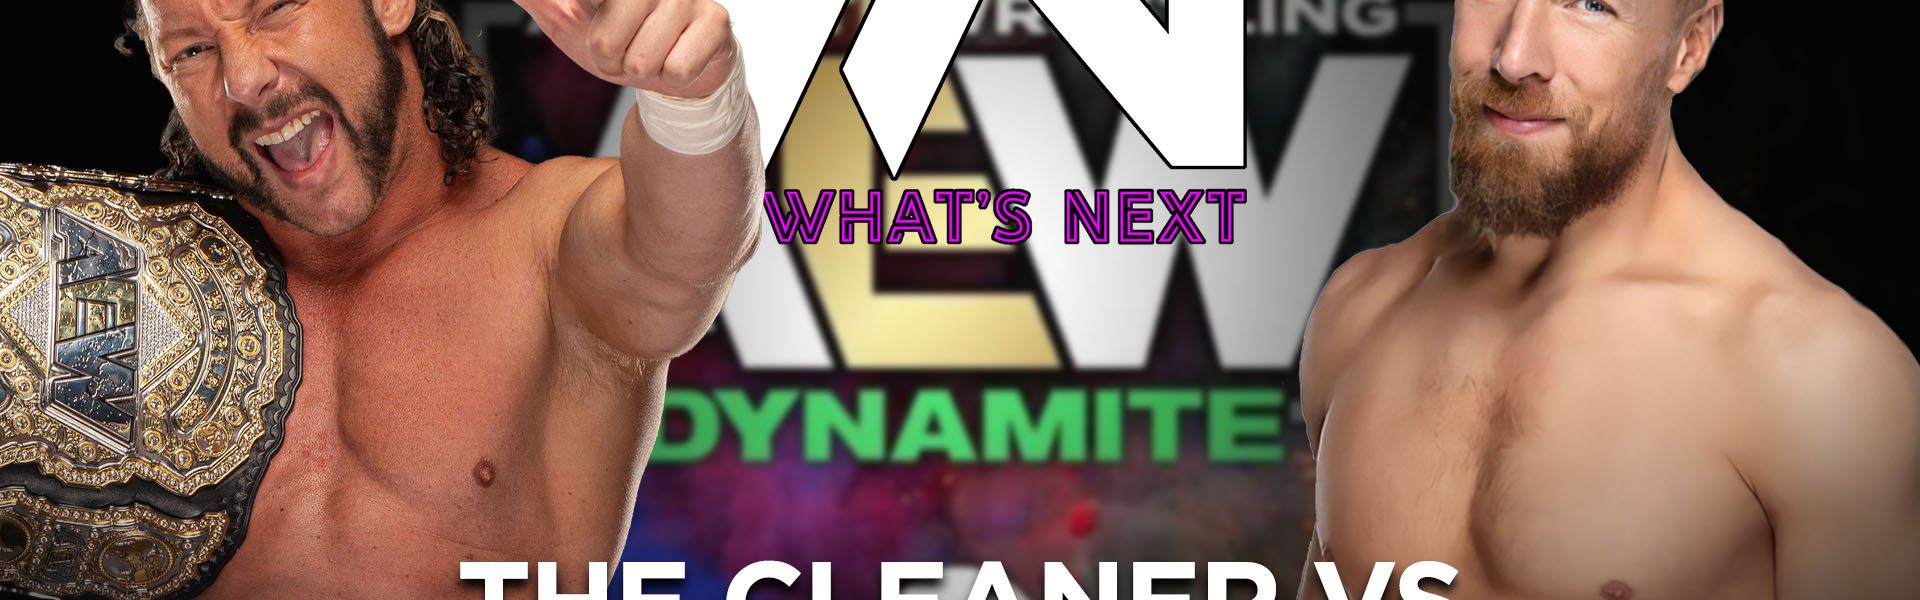 The Cleaner vs The American Dragon - What's Next #138